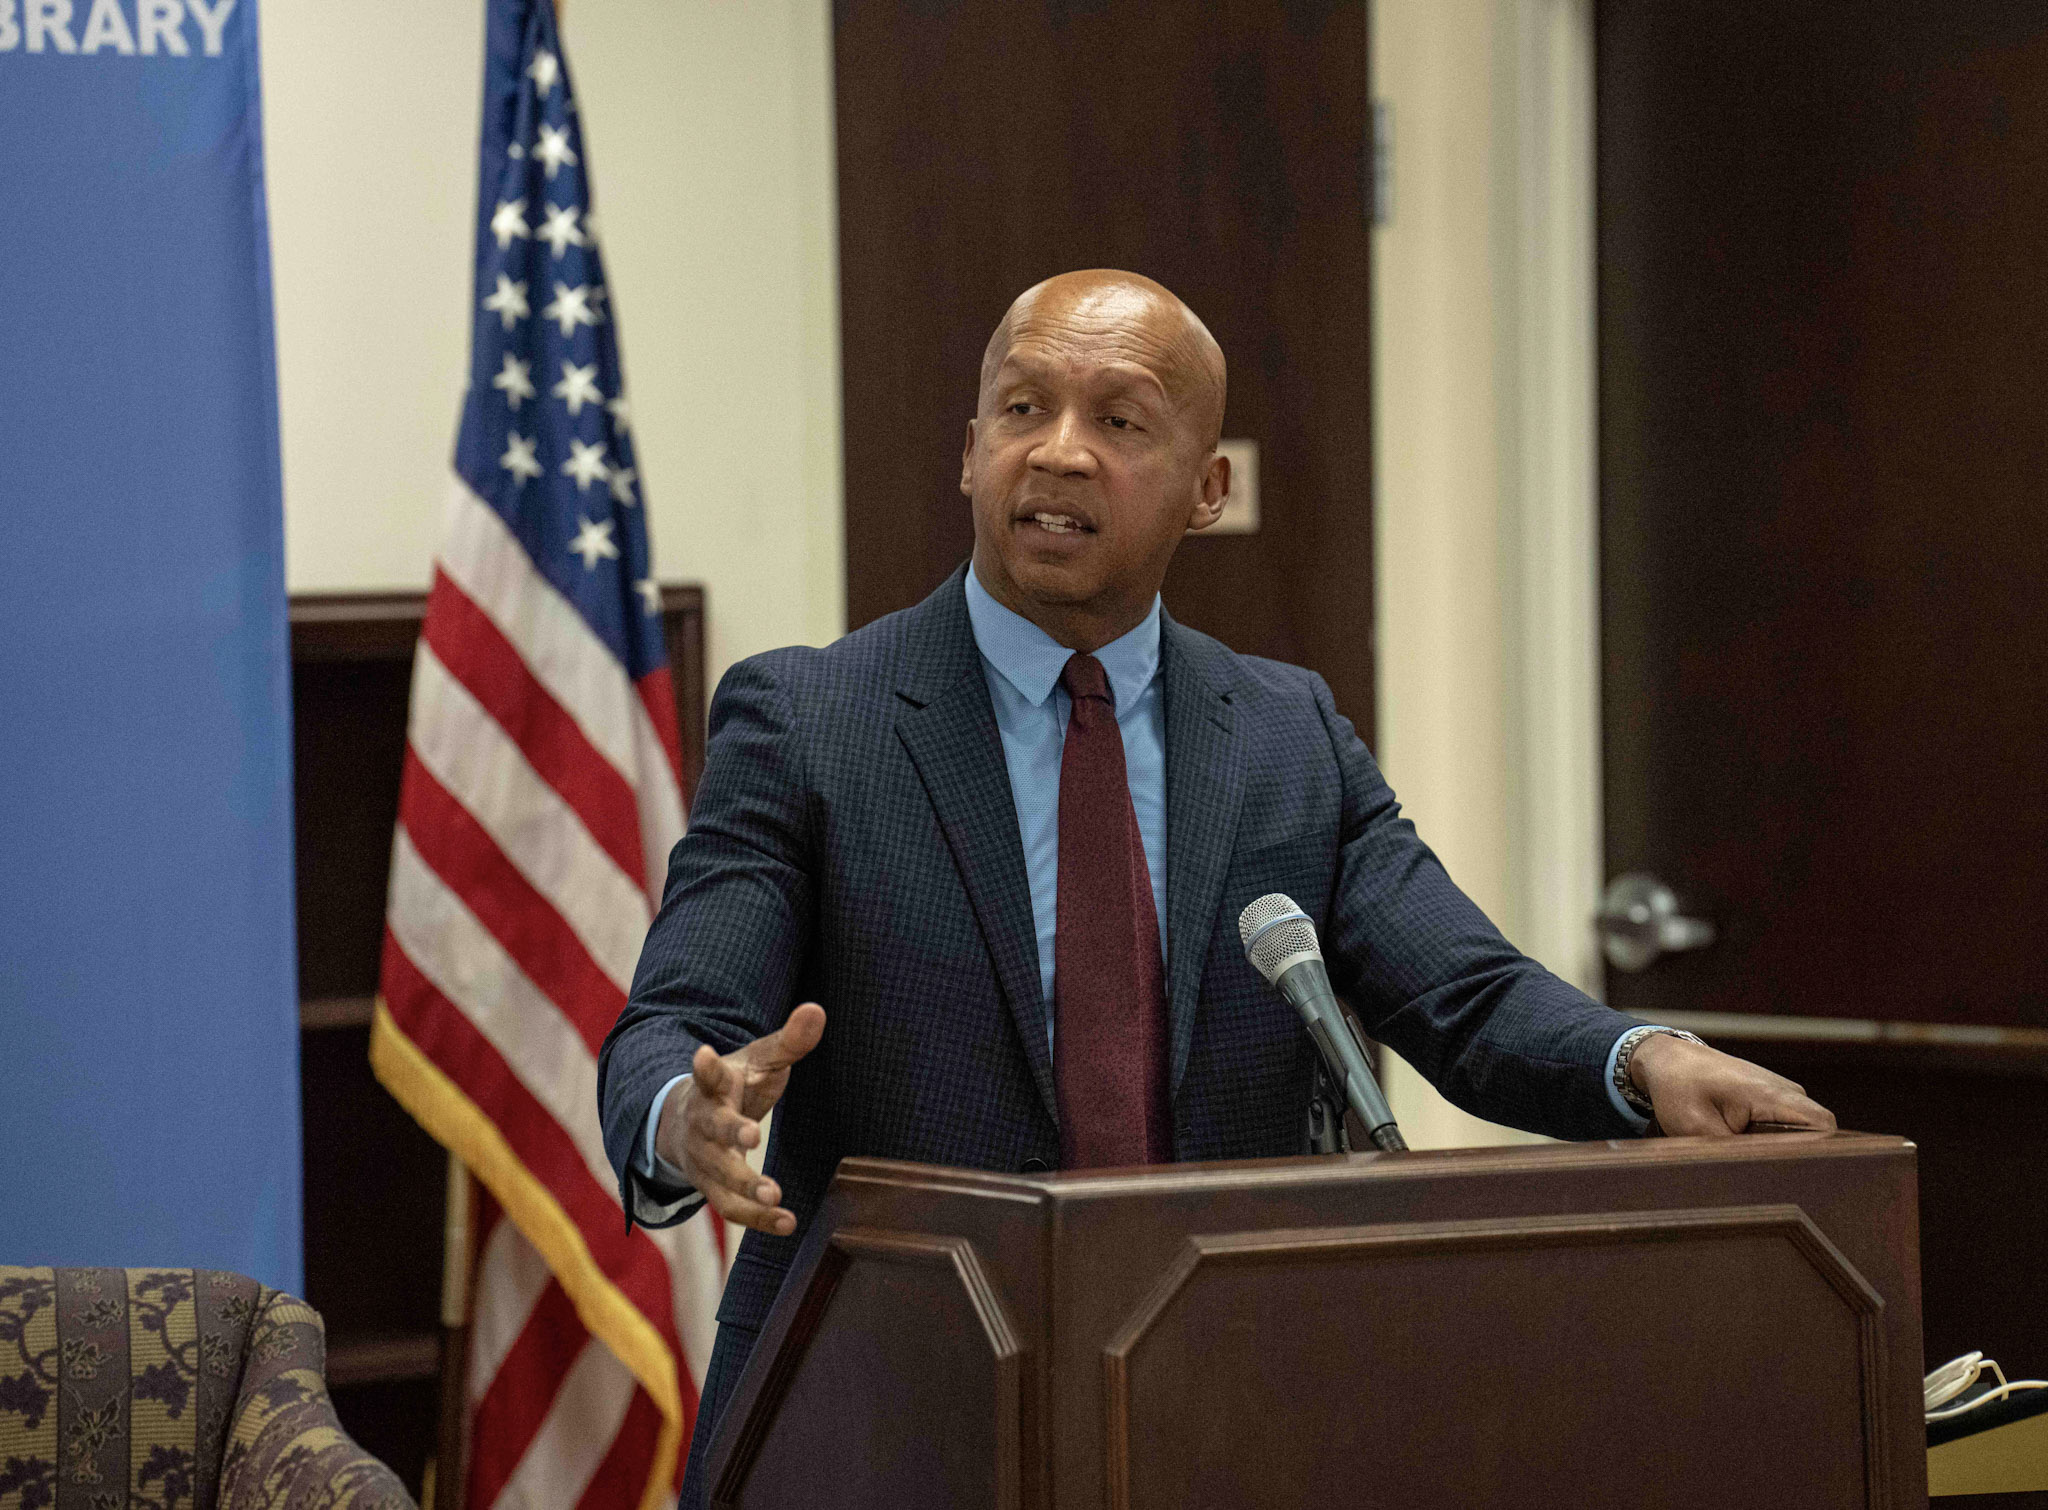 Equal Justice Initiative Executive Director Bryan Stevenson speaking at the Ralph J. Bunche State Department Library. He is standing at a lectern and a U.S. flag is behind him. [State Department photo]